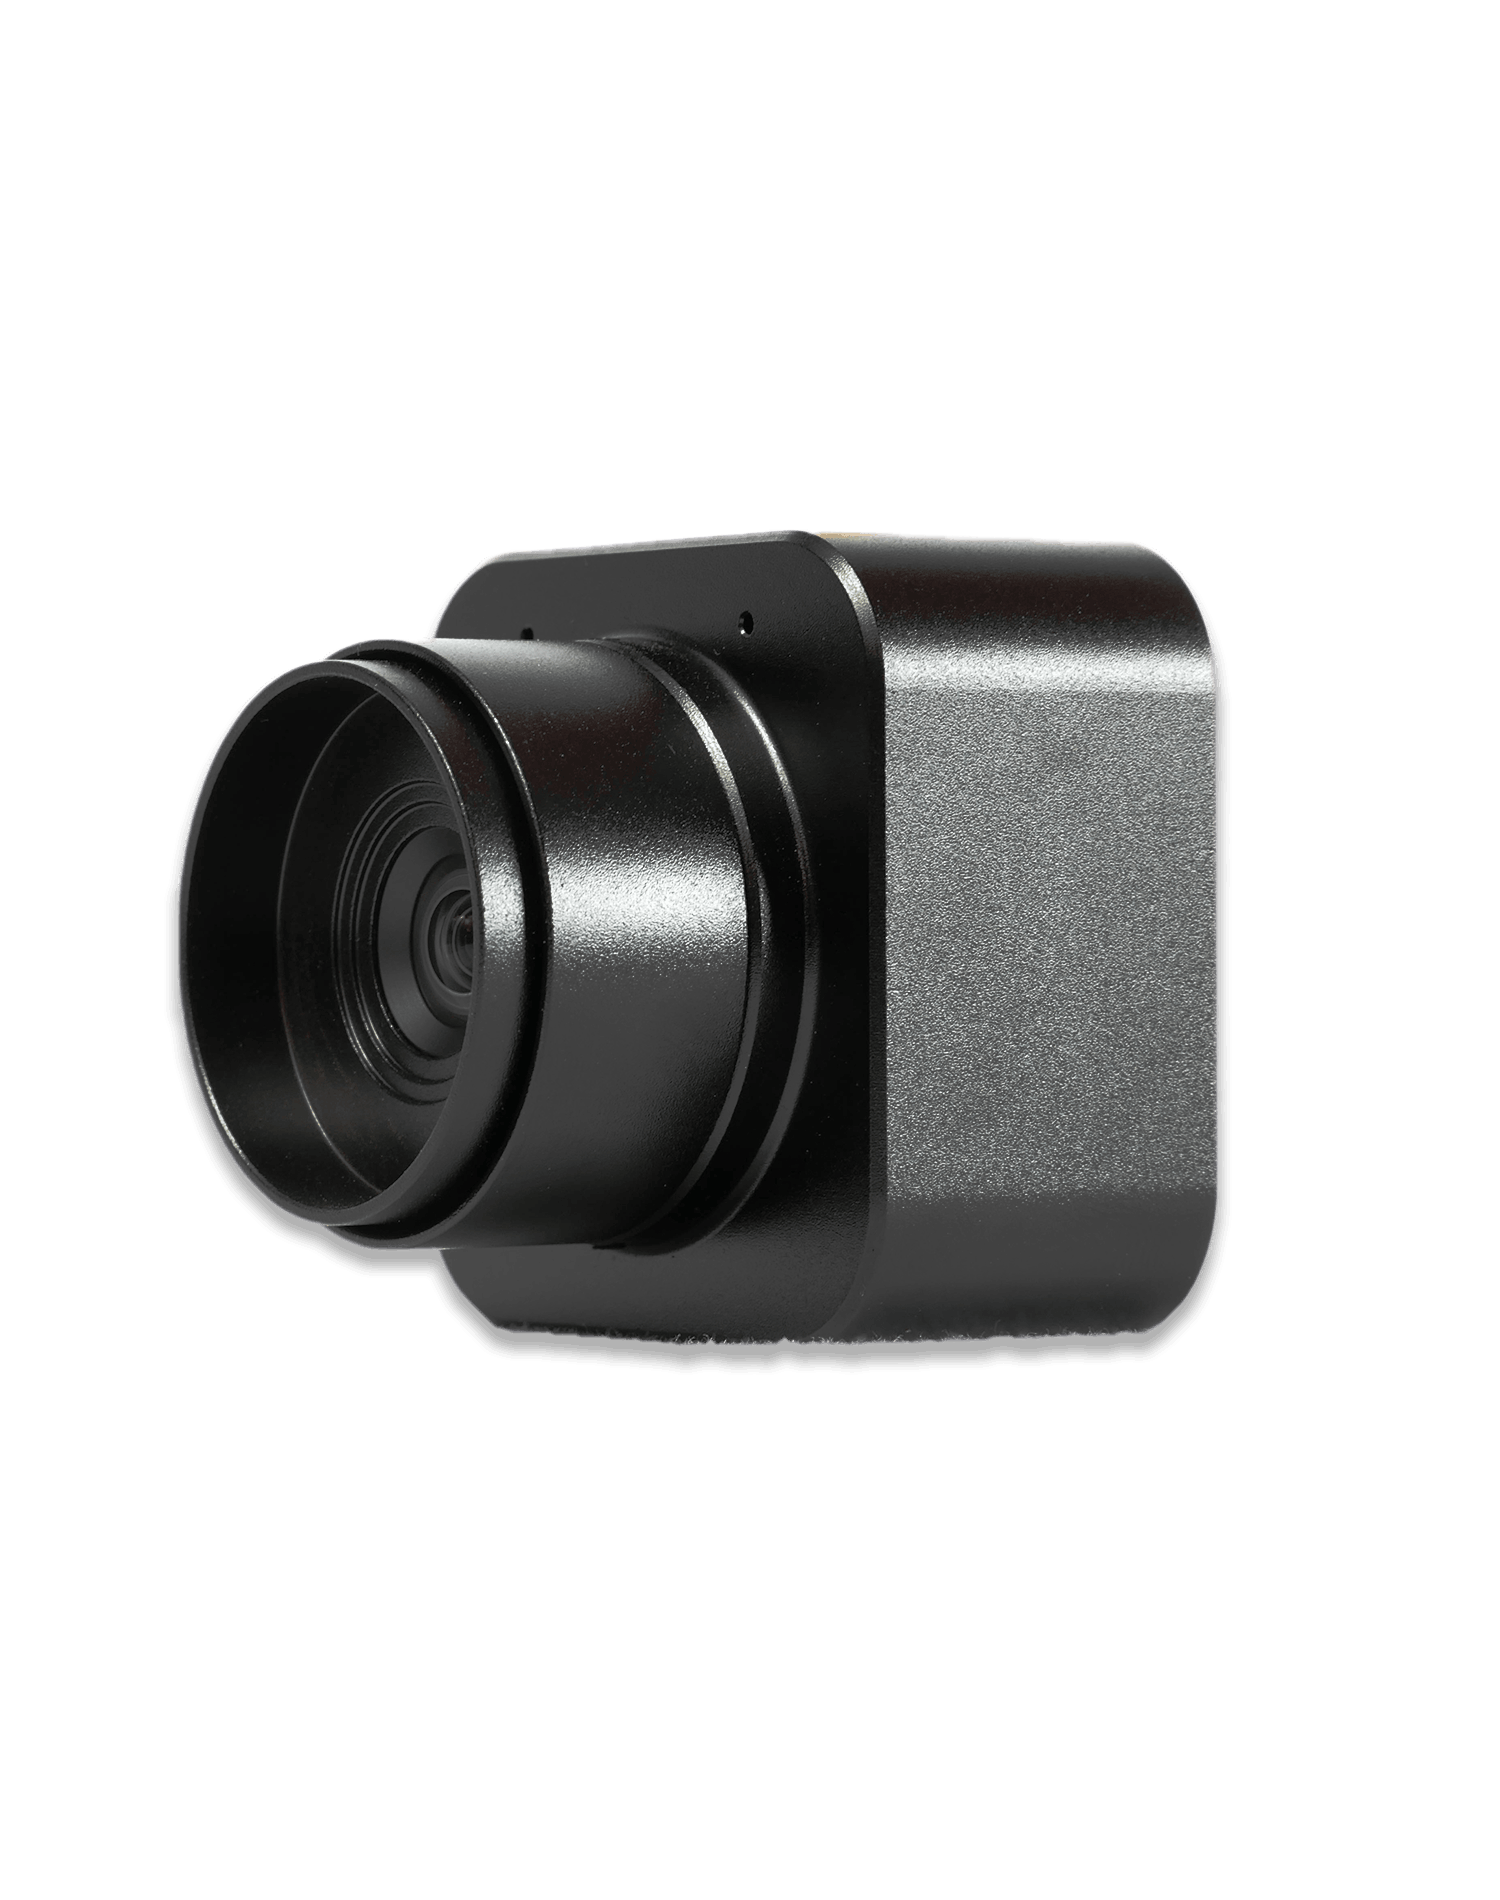 BlackCam 2.5mm camera for BlackBox with no background